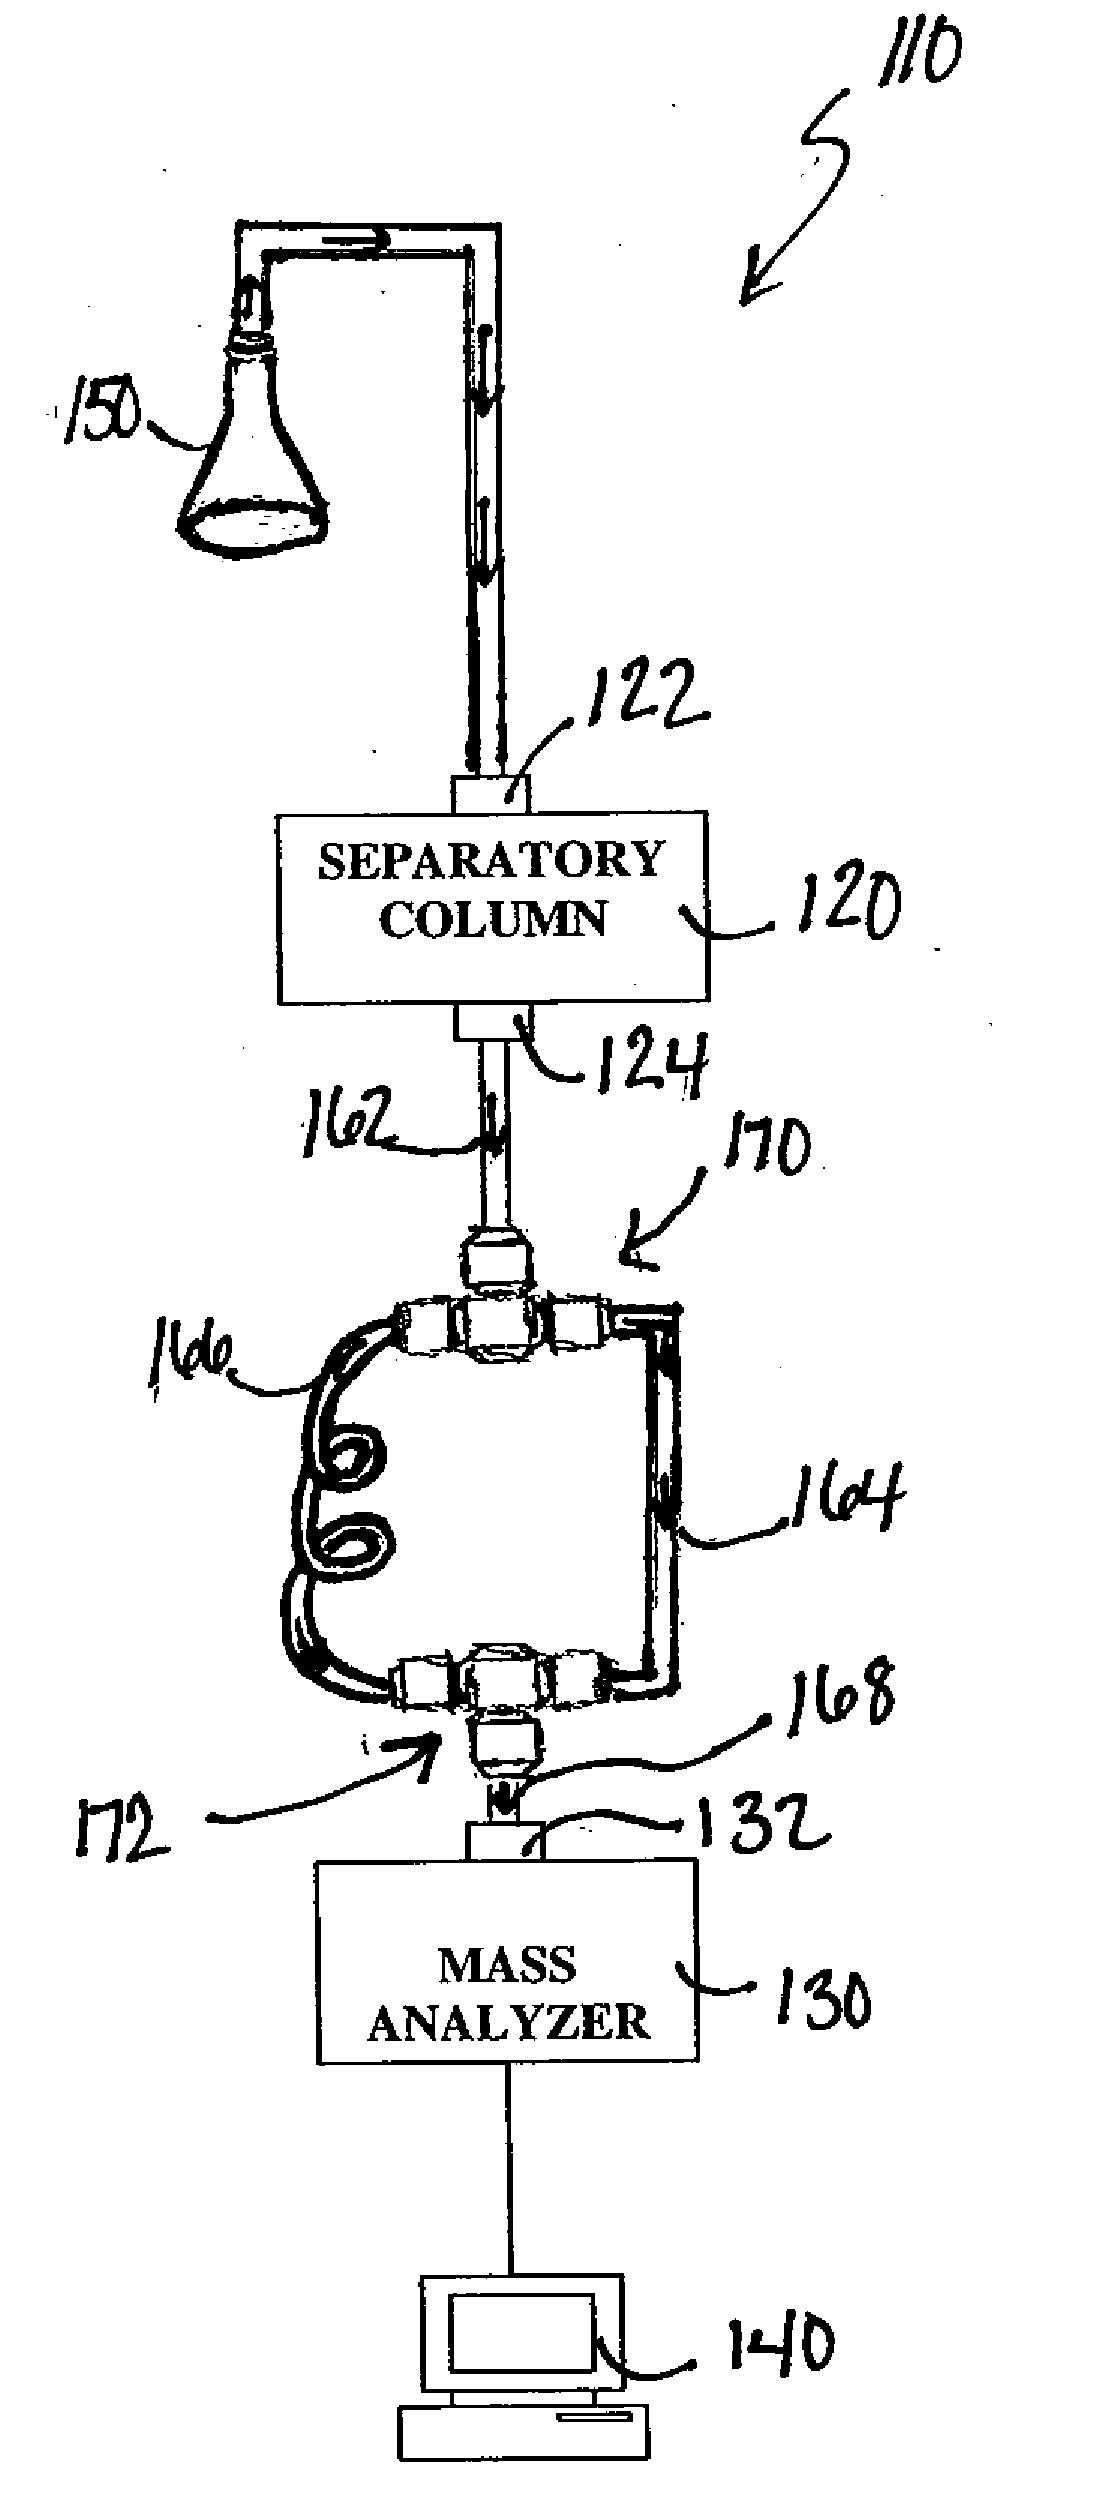 Apparatus system and method for mass analysis of a sample